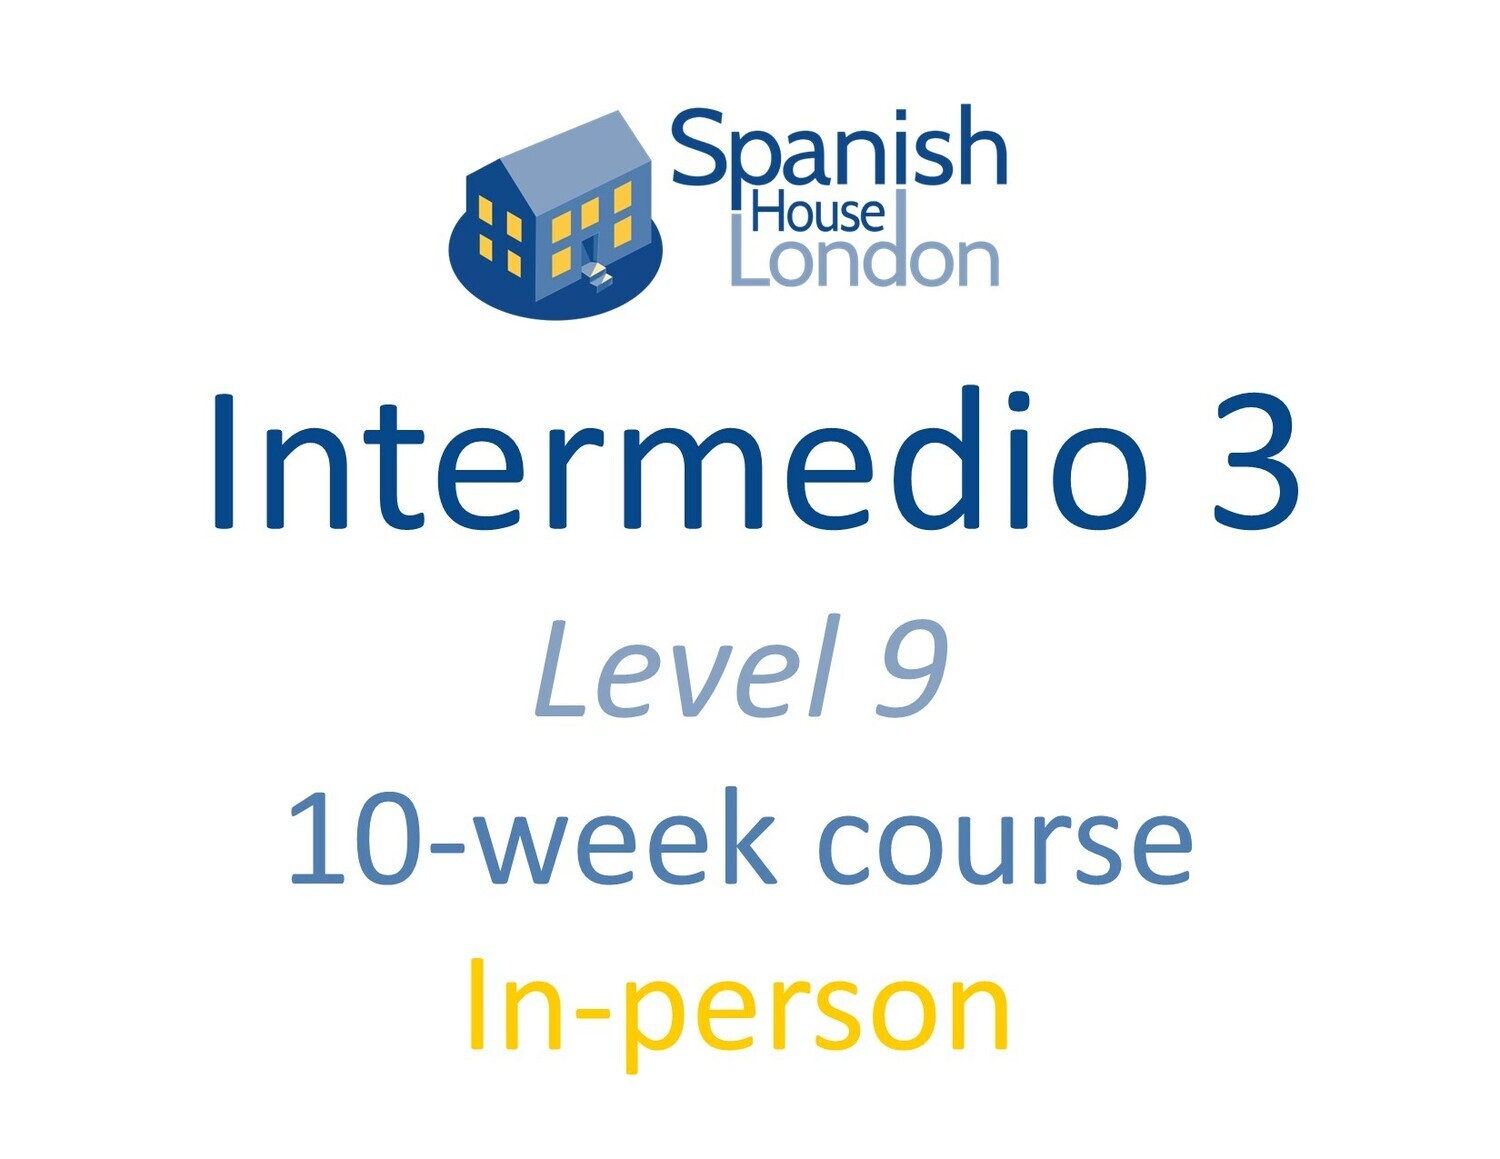 Intermedio 3 Course starting on 13th June at 7.30pm in Clapham North